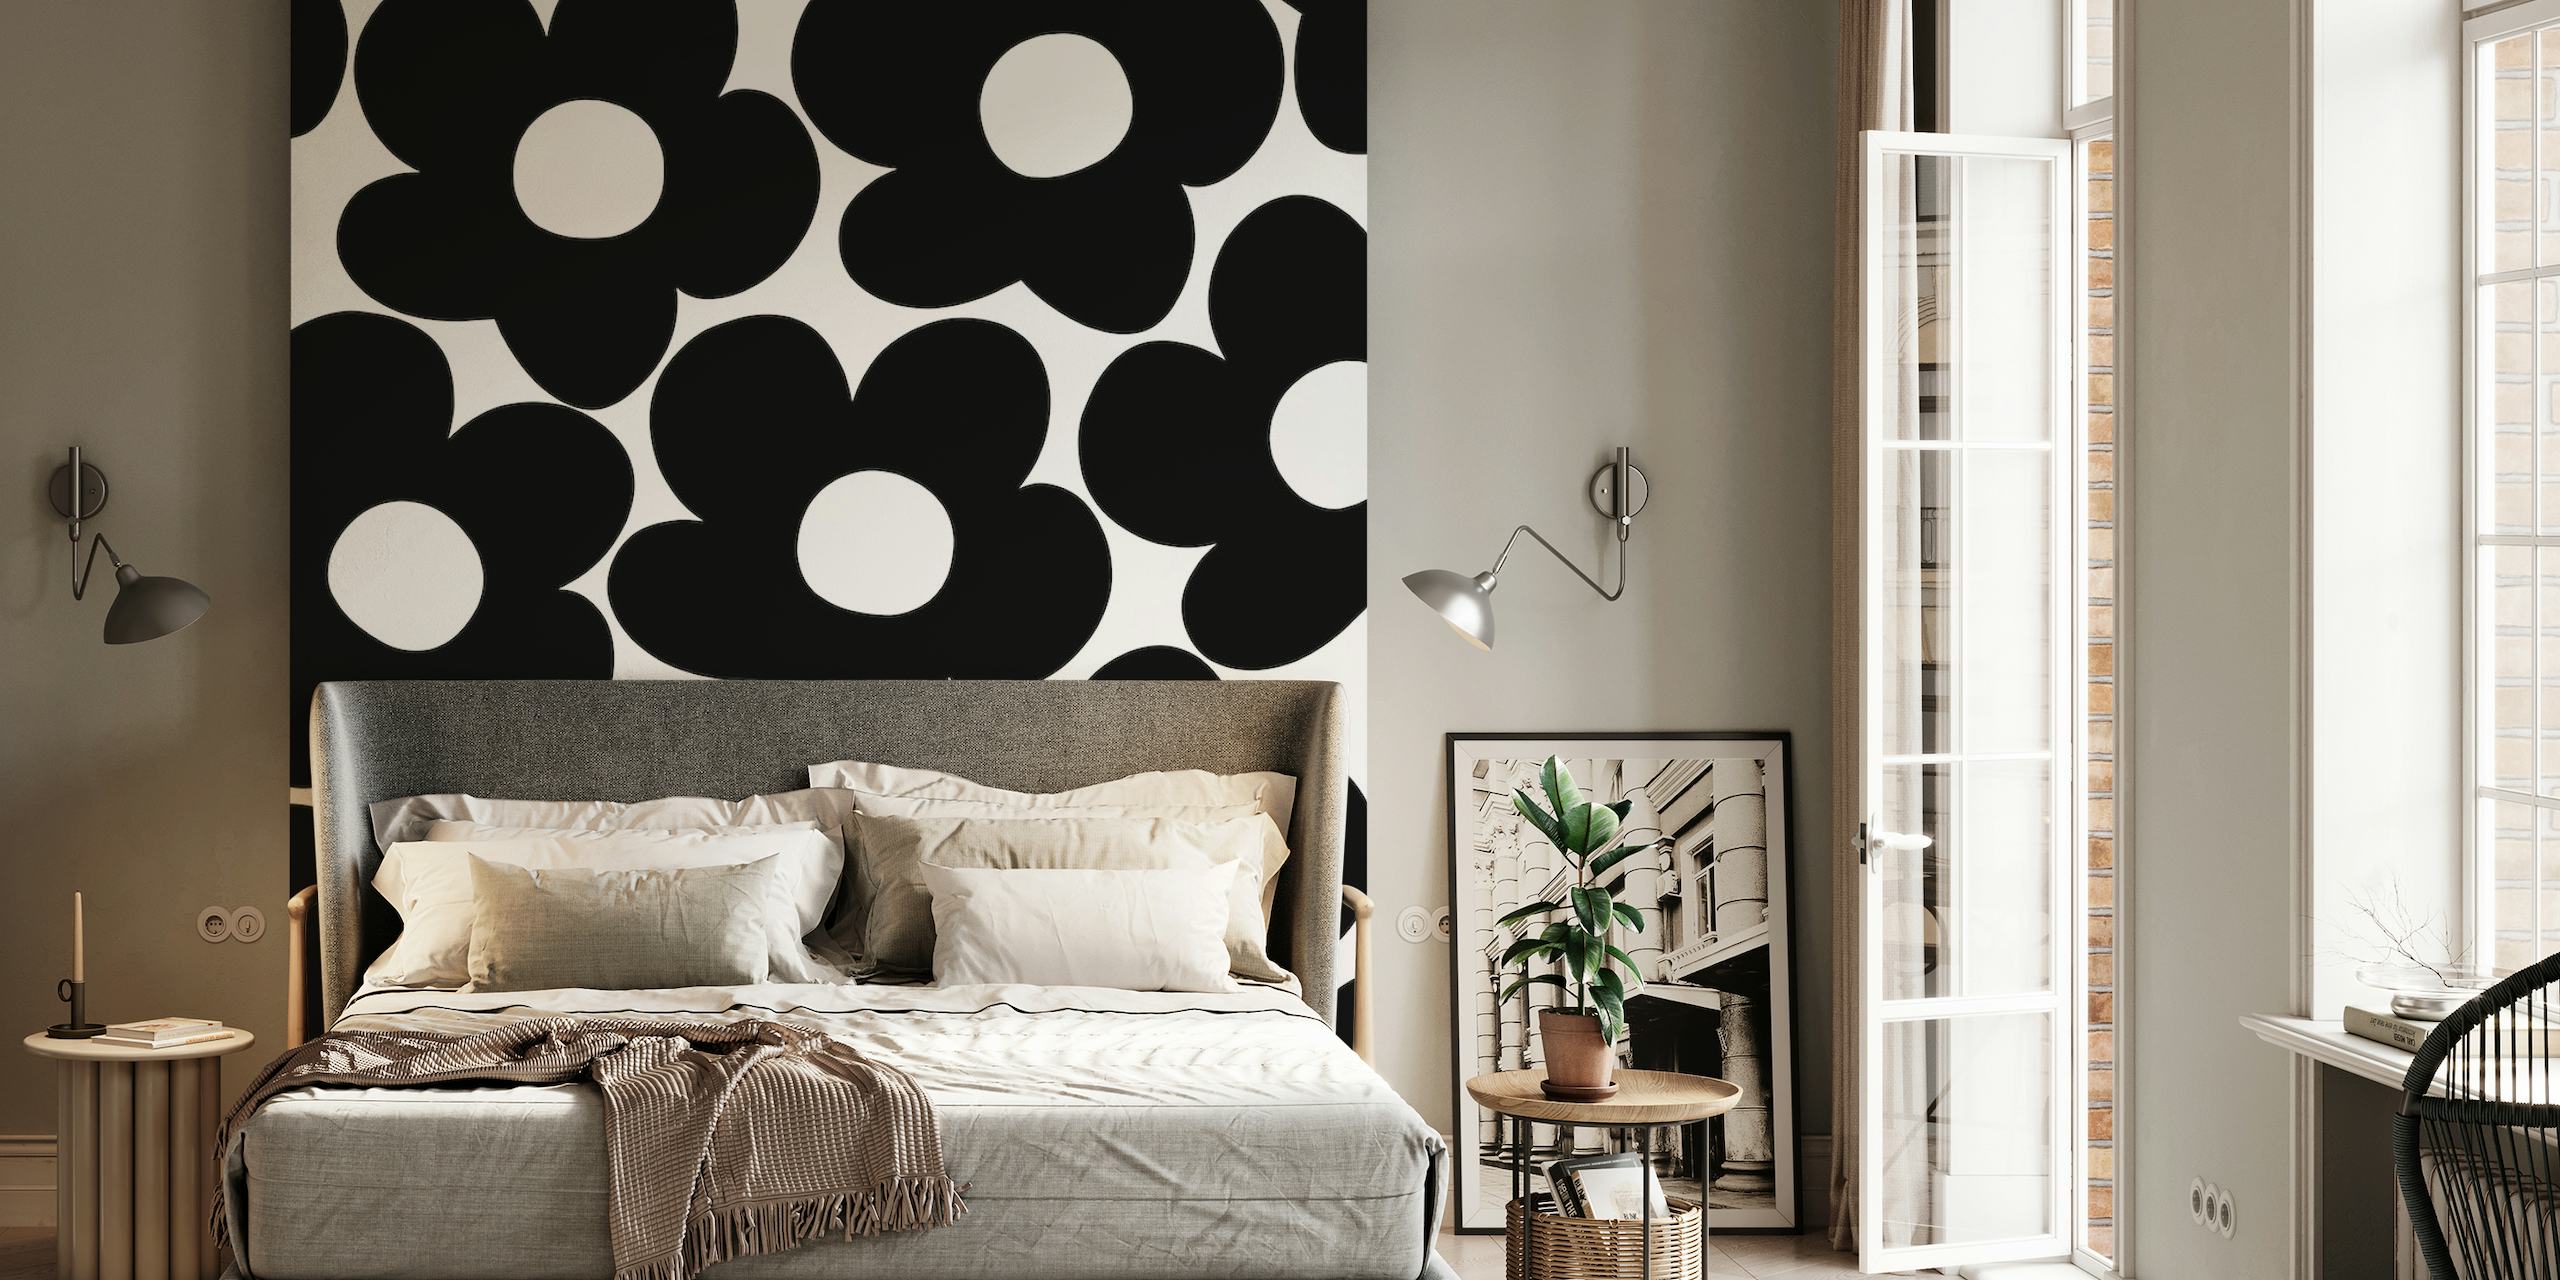 Black and white wall mural with retro daisy pattern